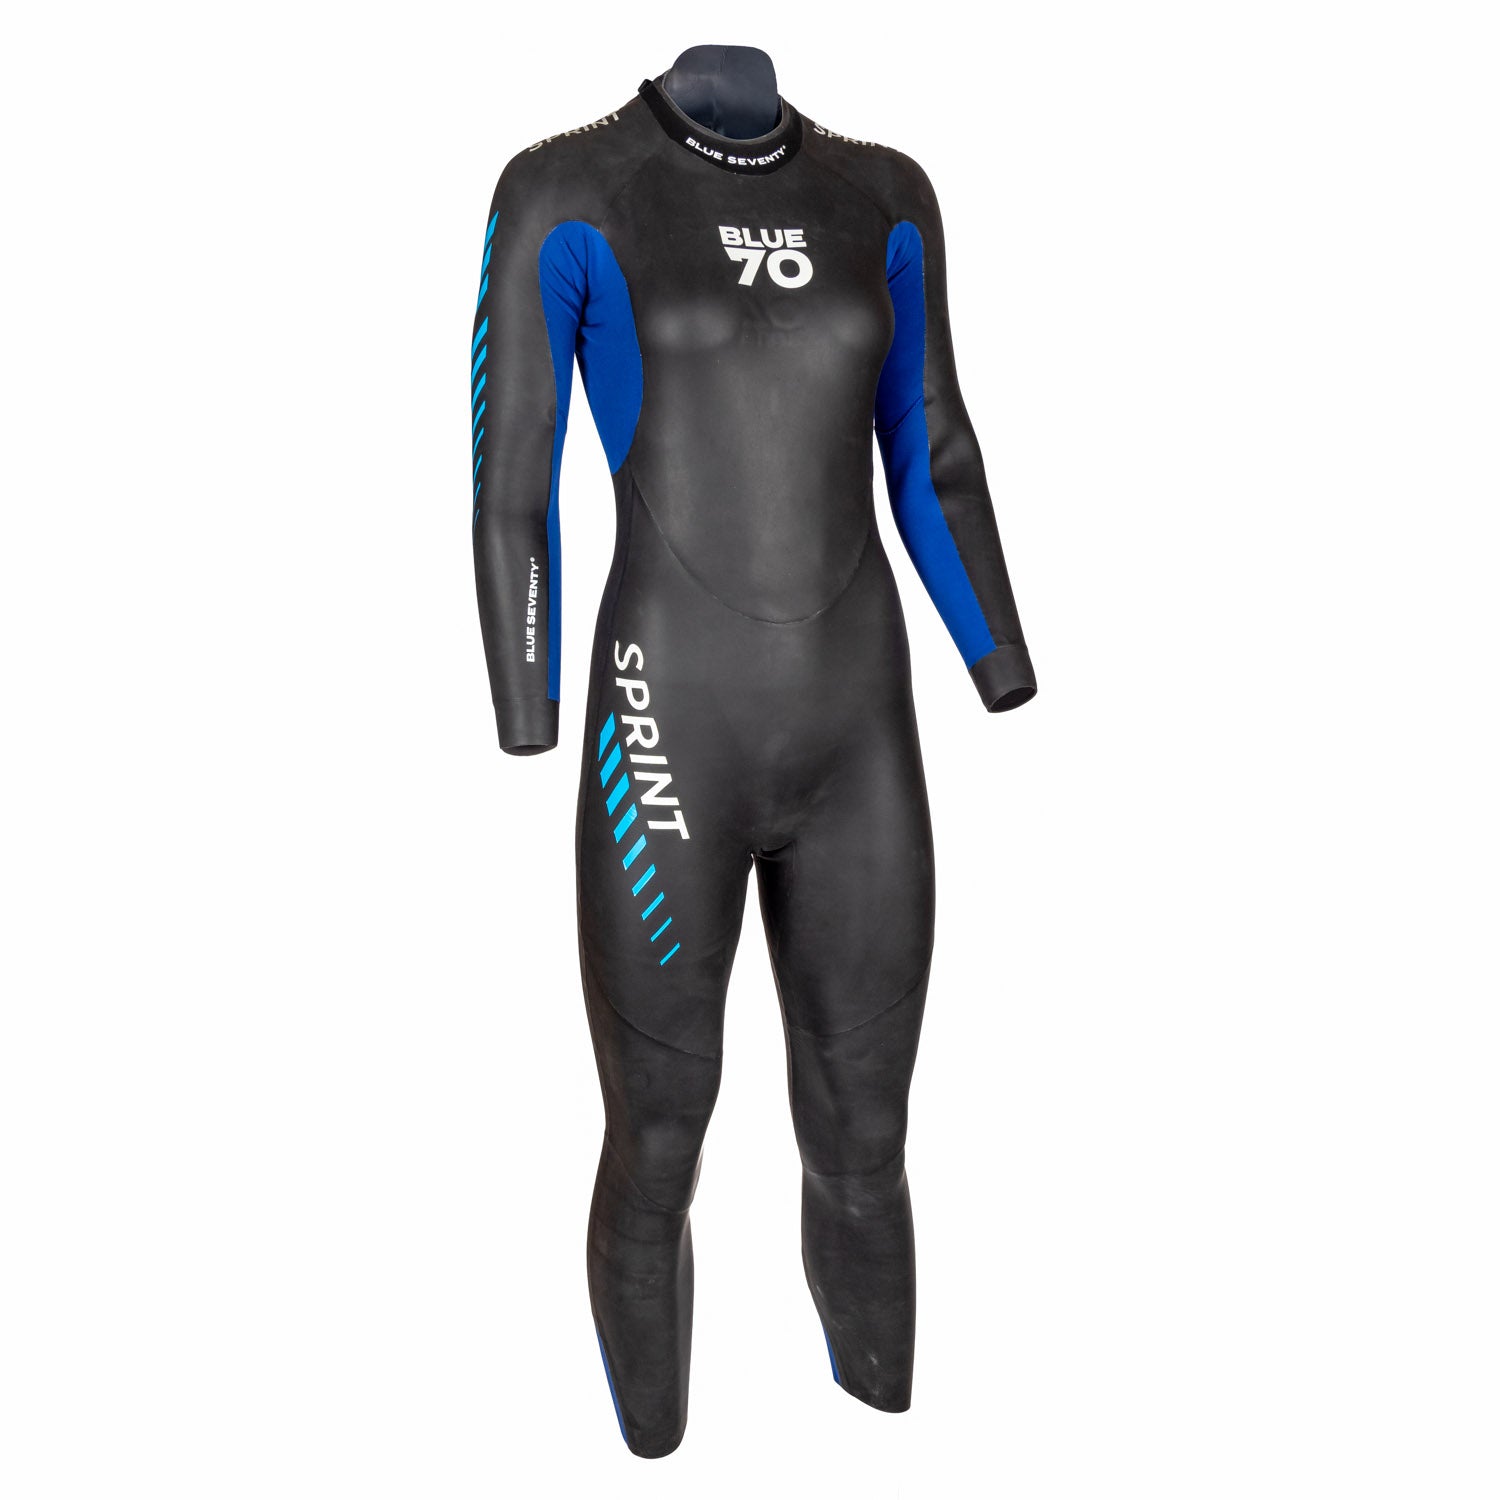 Beginners Guide to Wetsuits, Buying & Wetsuit Sizing